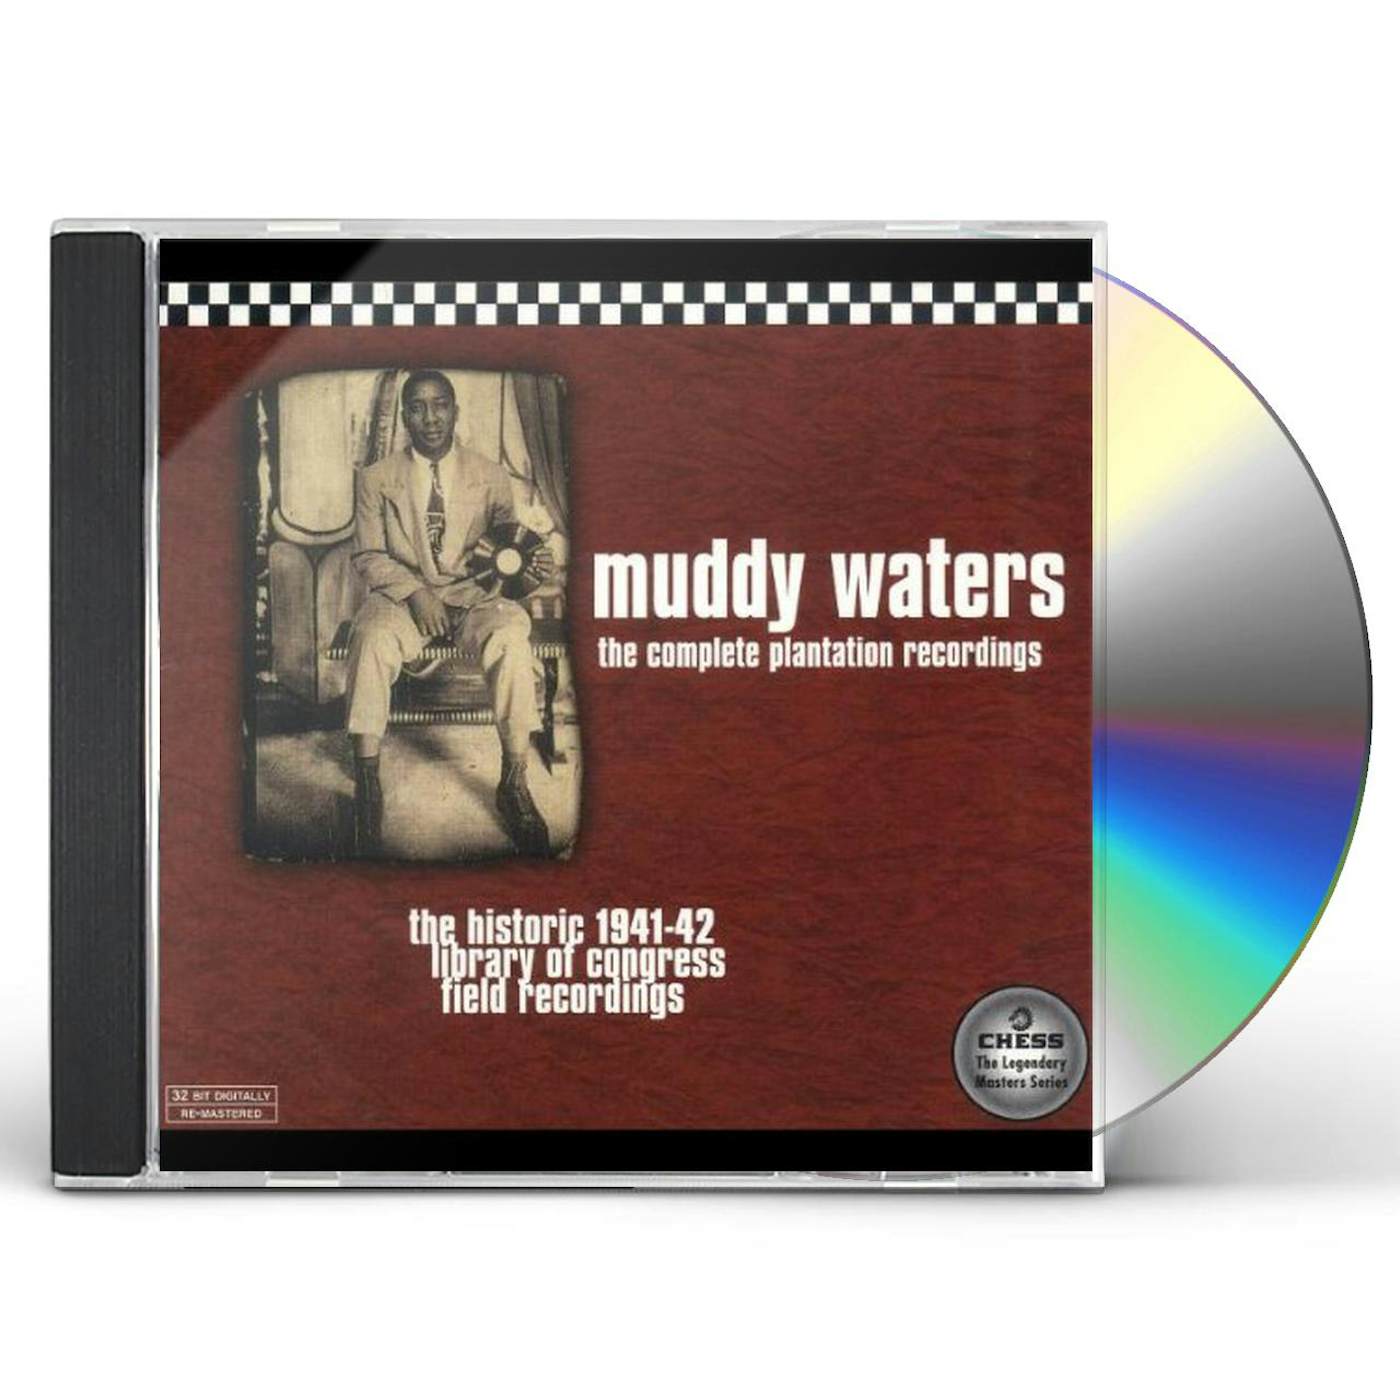 Muddy Waters COMPLETE PLANTATION RECORDINGS: HISTORIC 1941-1942 CD